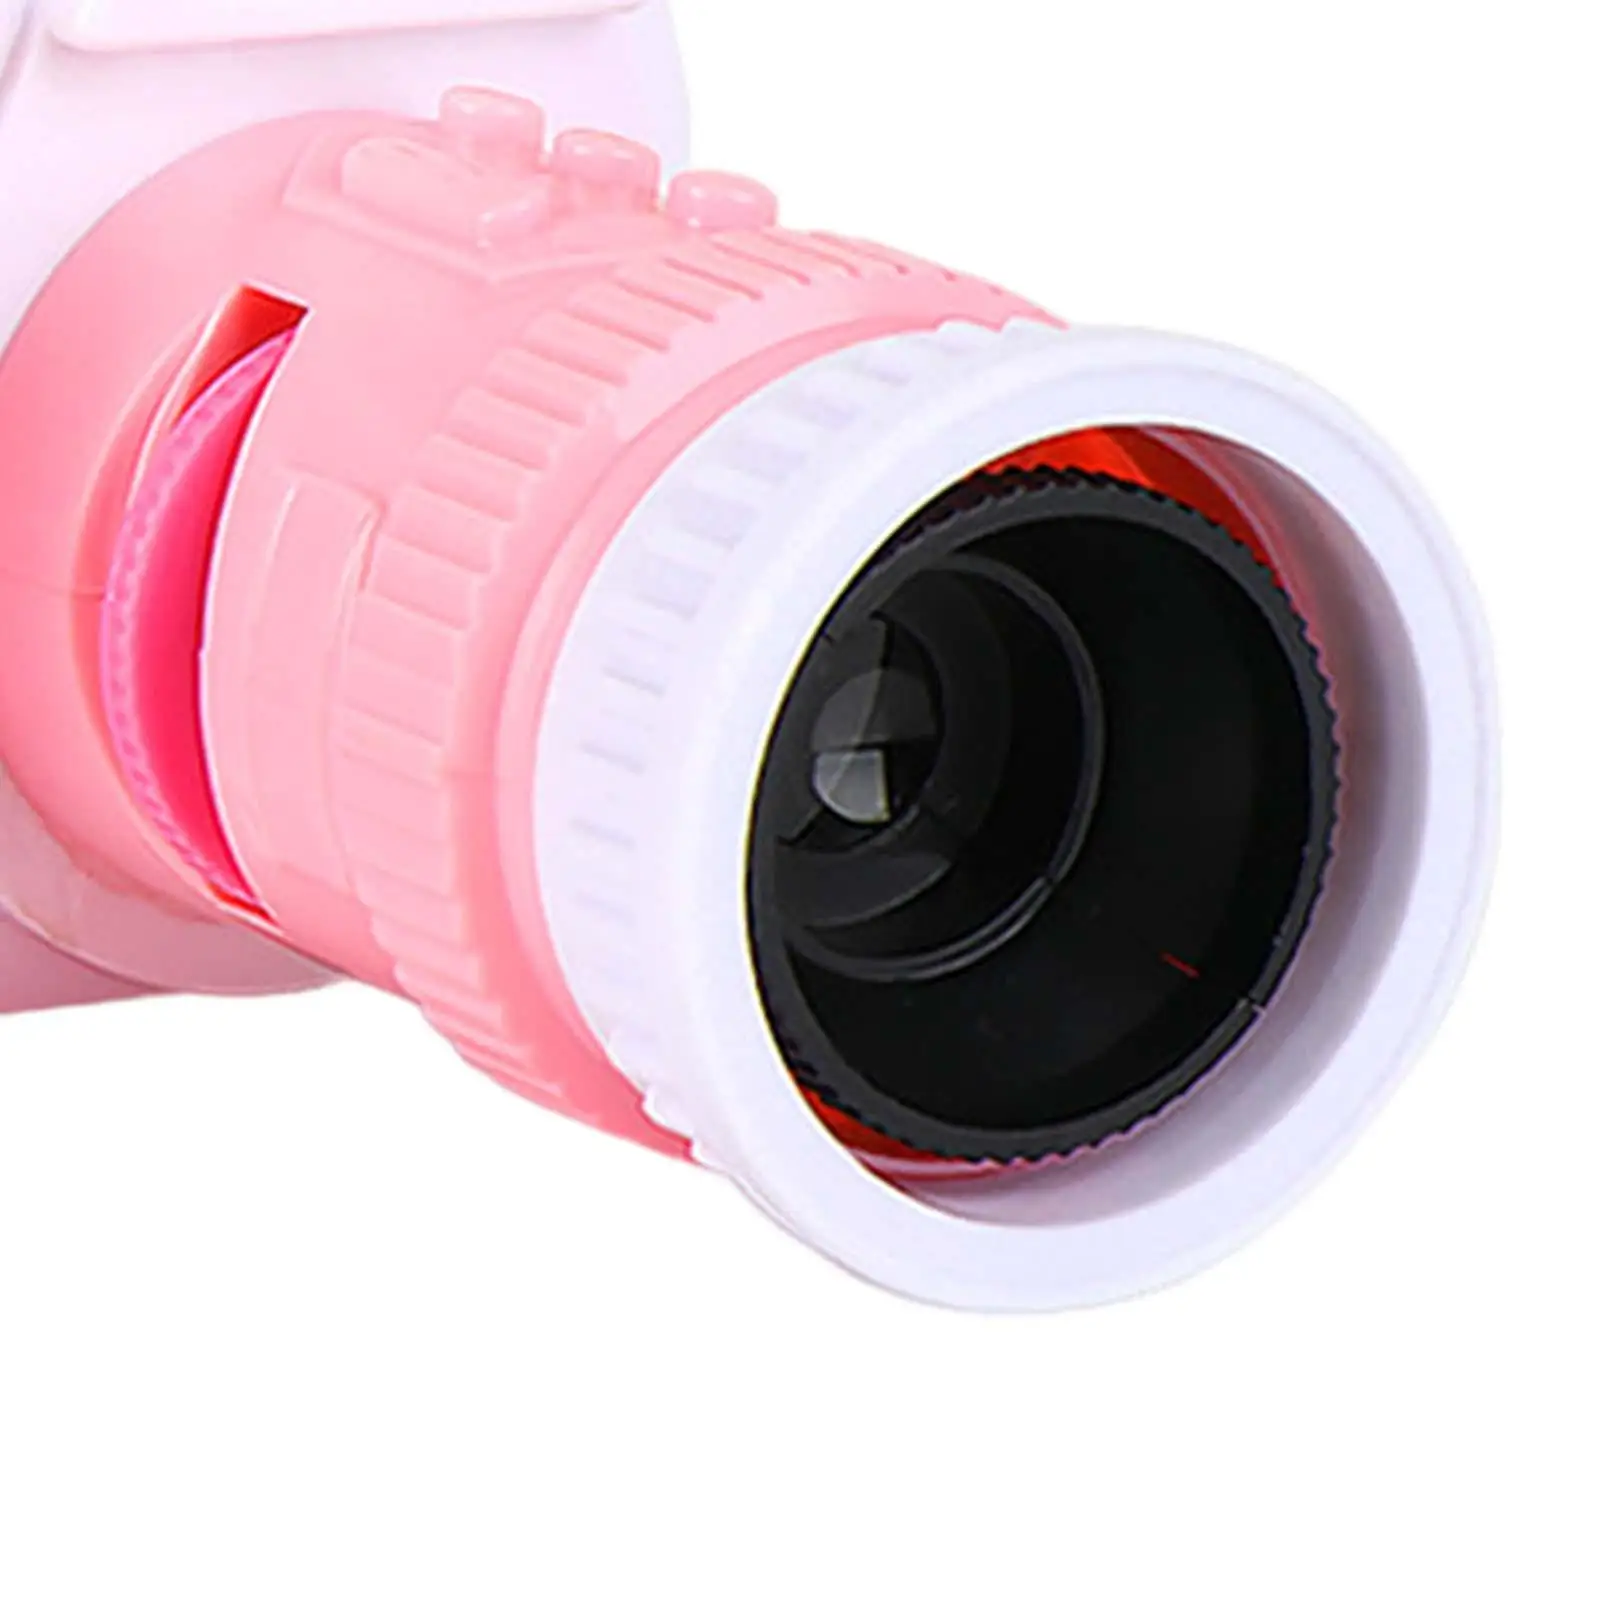 Portable Projection Camera Toy Educational Toy for Children Day Boys Girls